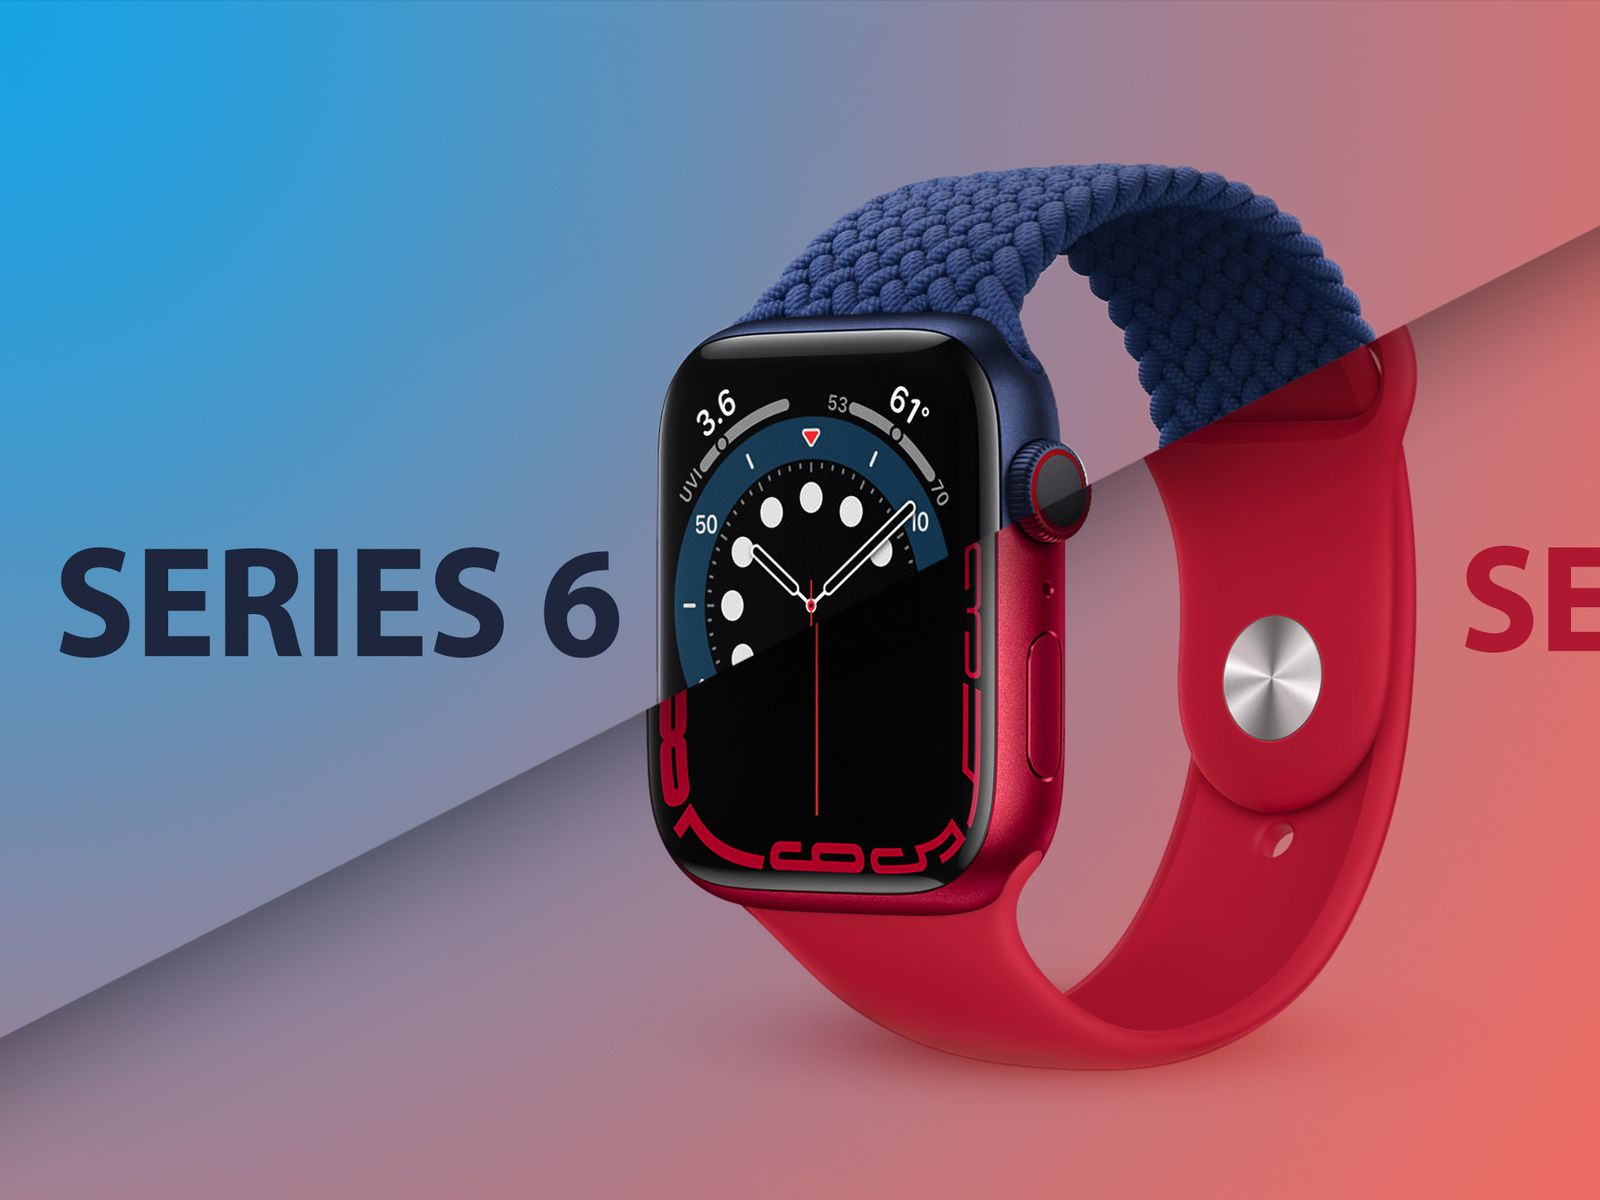 Apple Watch Series 6 delivers breakthrough wellness and fitness  capabilities - Apple